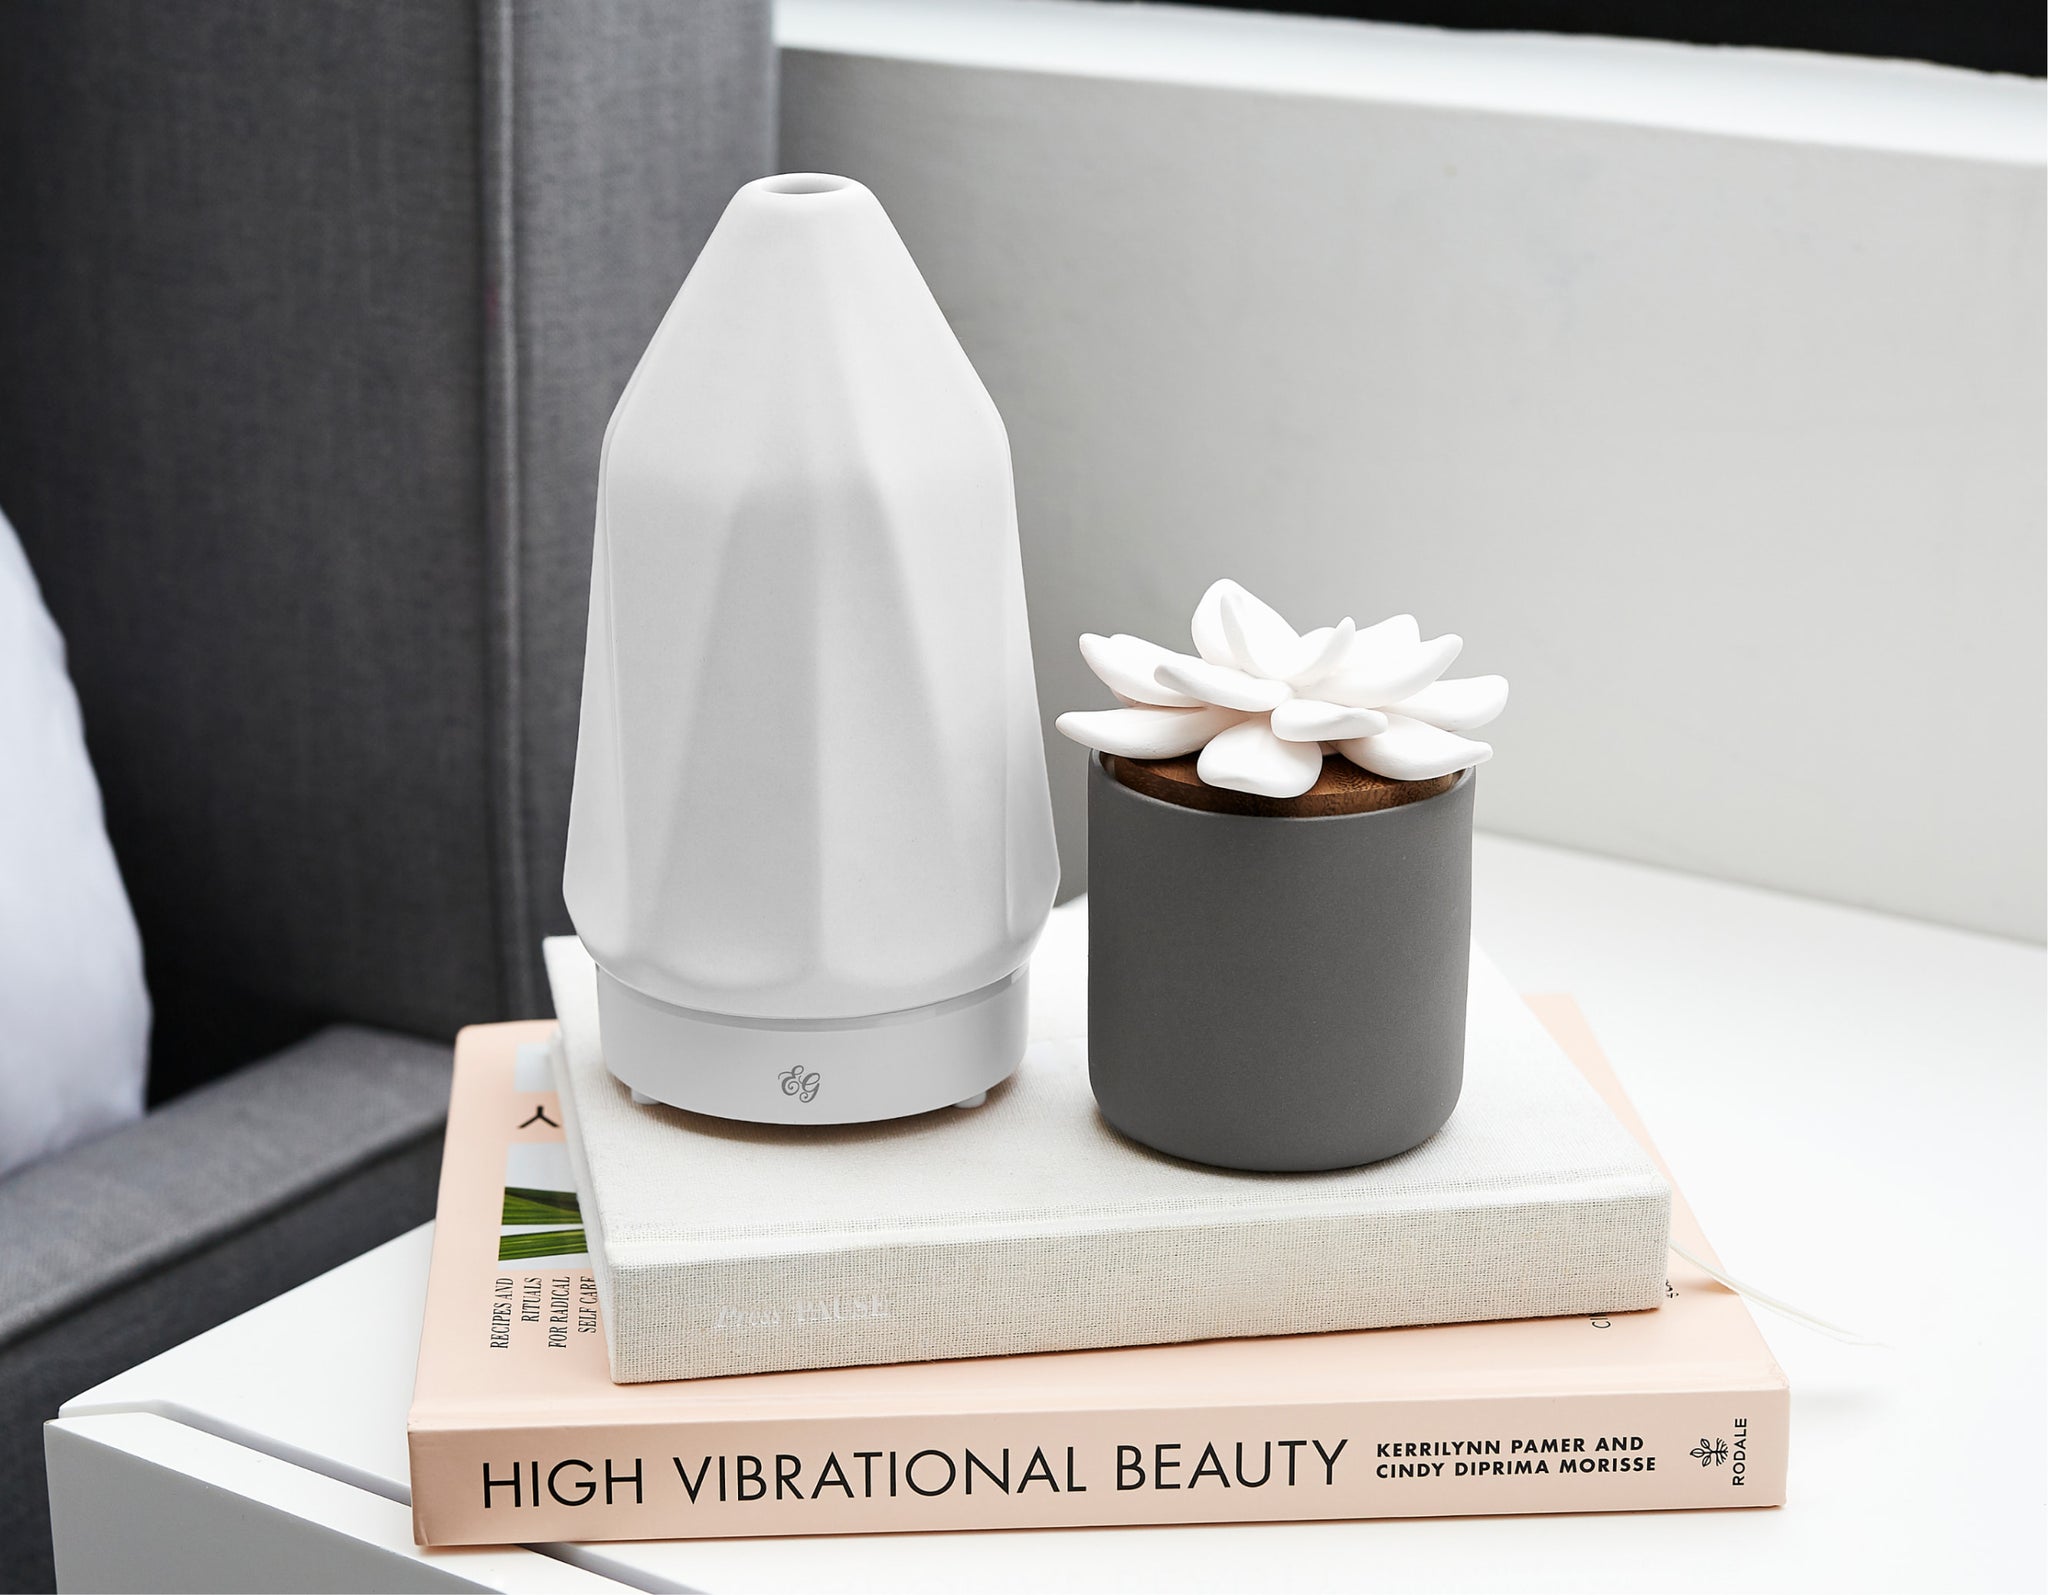 Make Your Car Smell Amazing with the Invigorate Car Essential Oil Diffuser